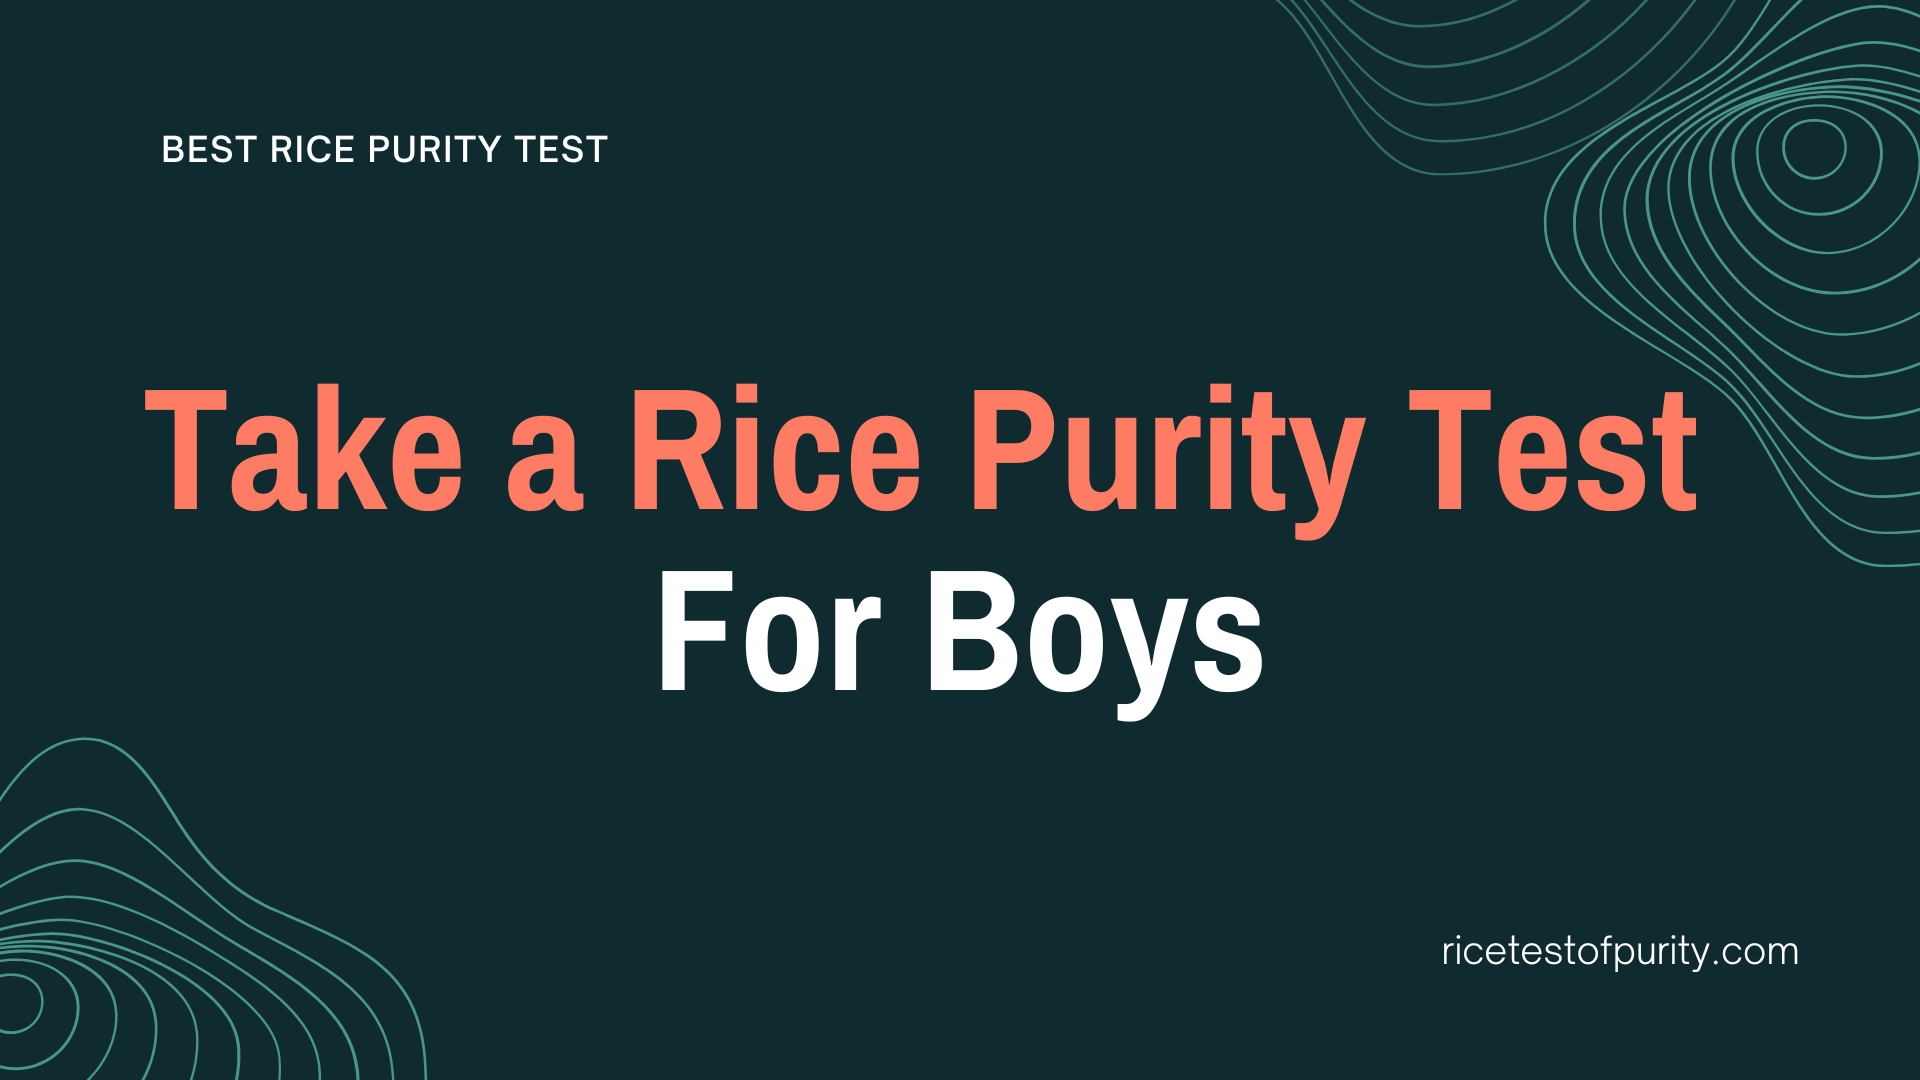 Taking a Rice Purity Test for Boys